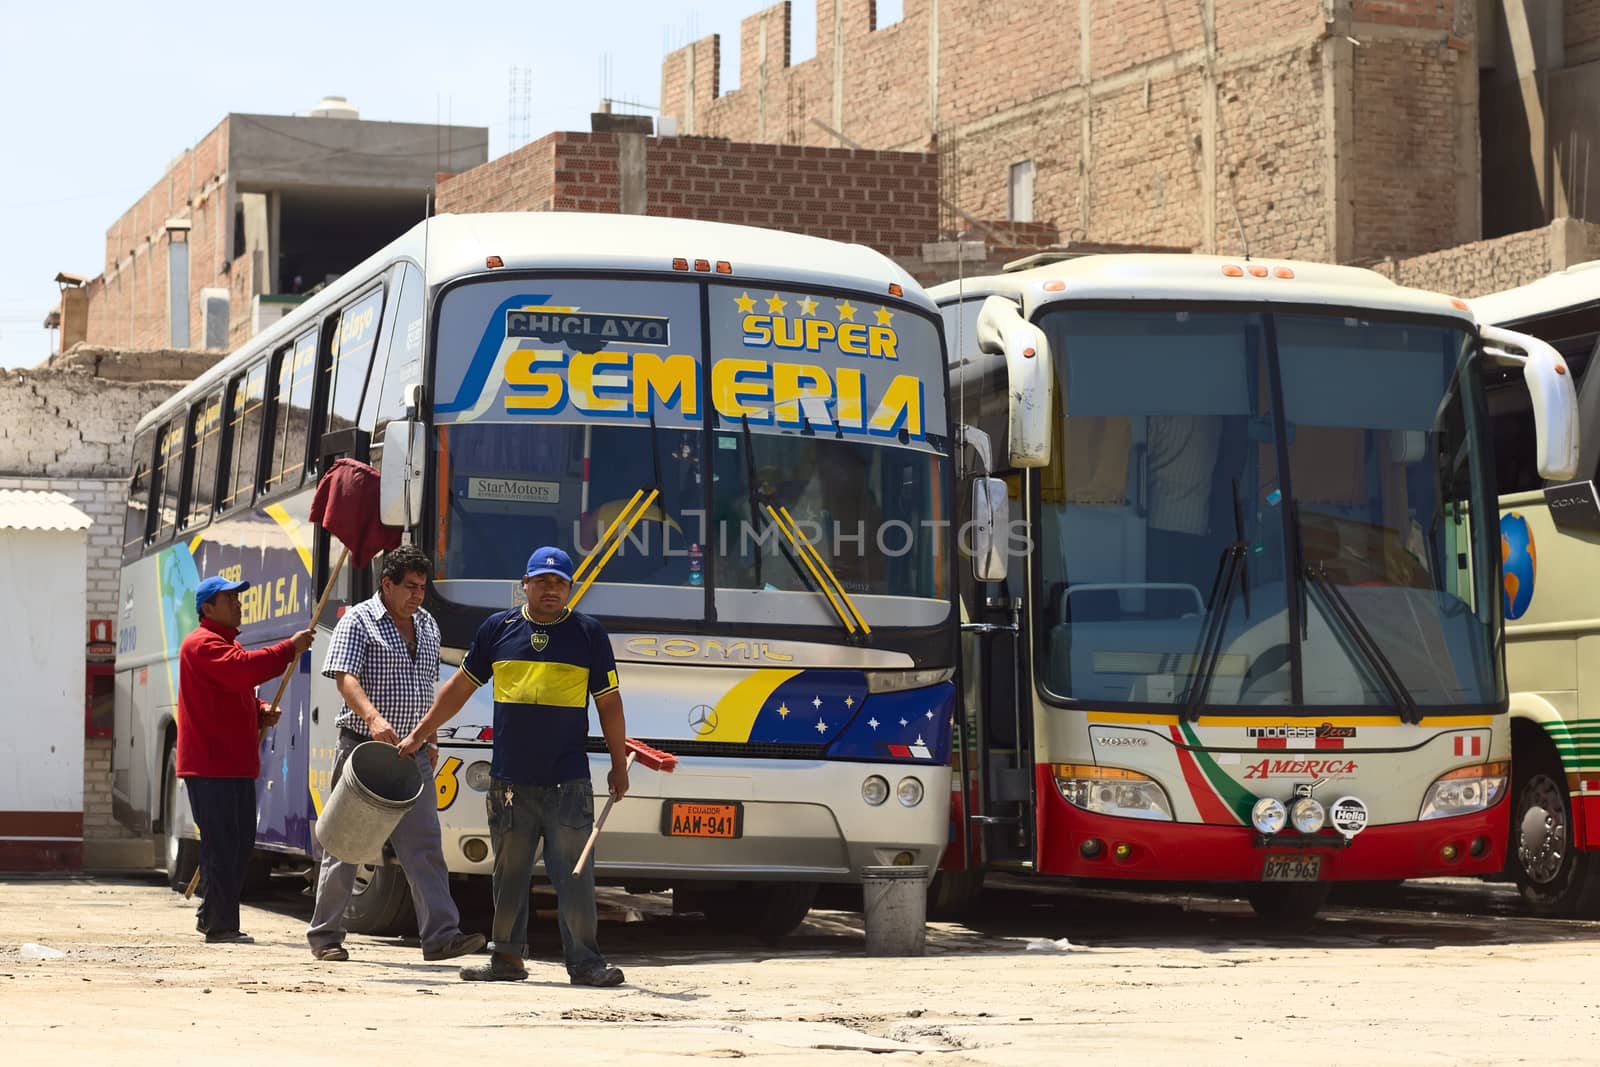 People Cleaning a Long-Distance Bus in Chiclayo, Peru by sven